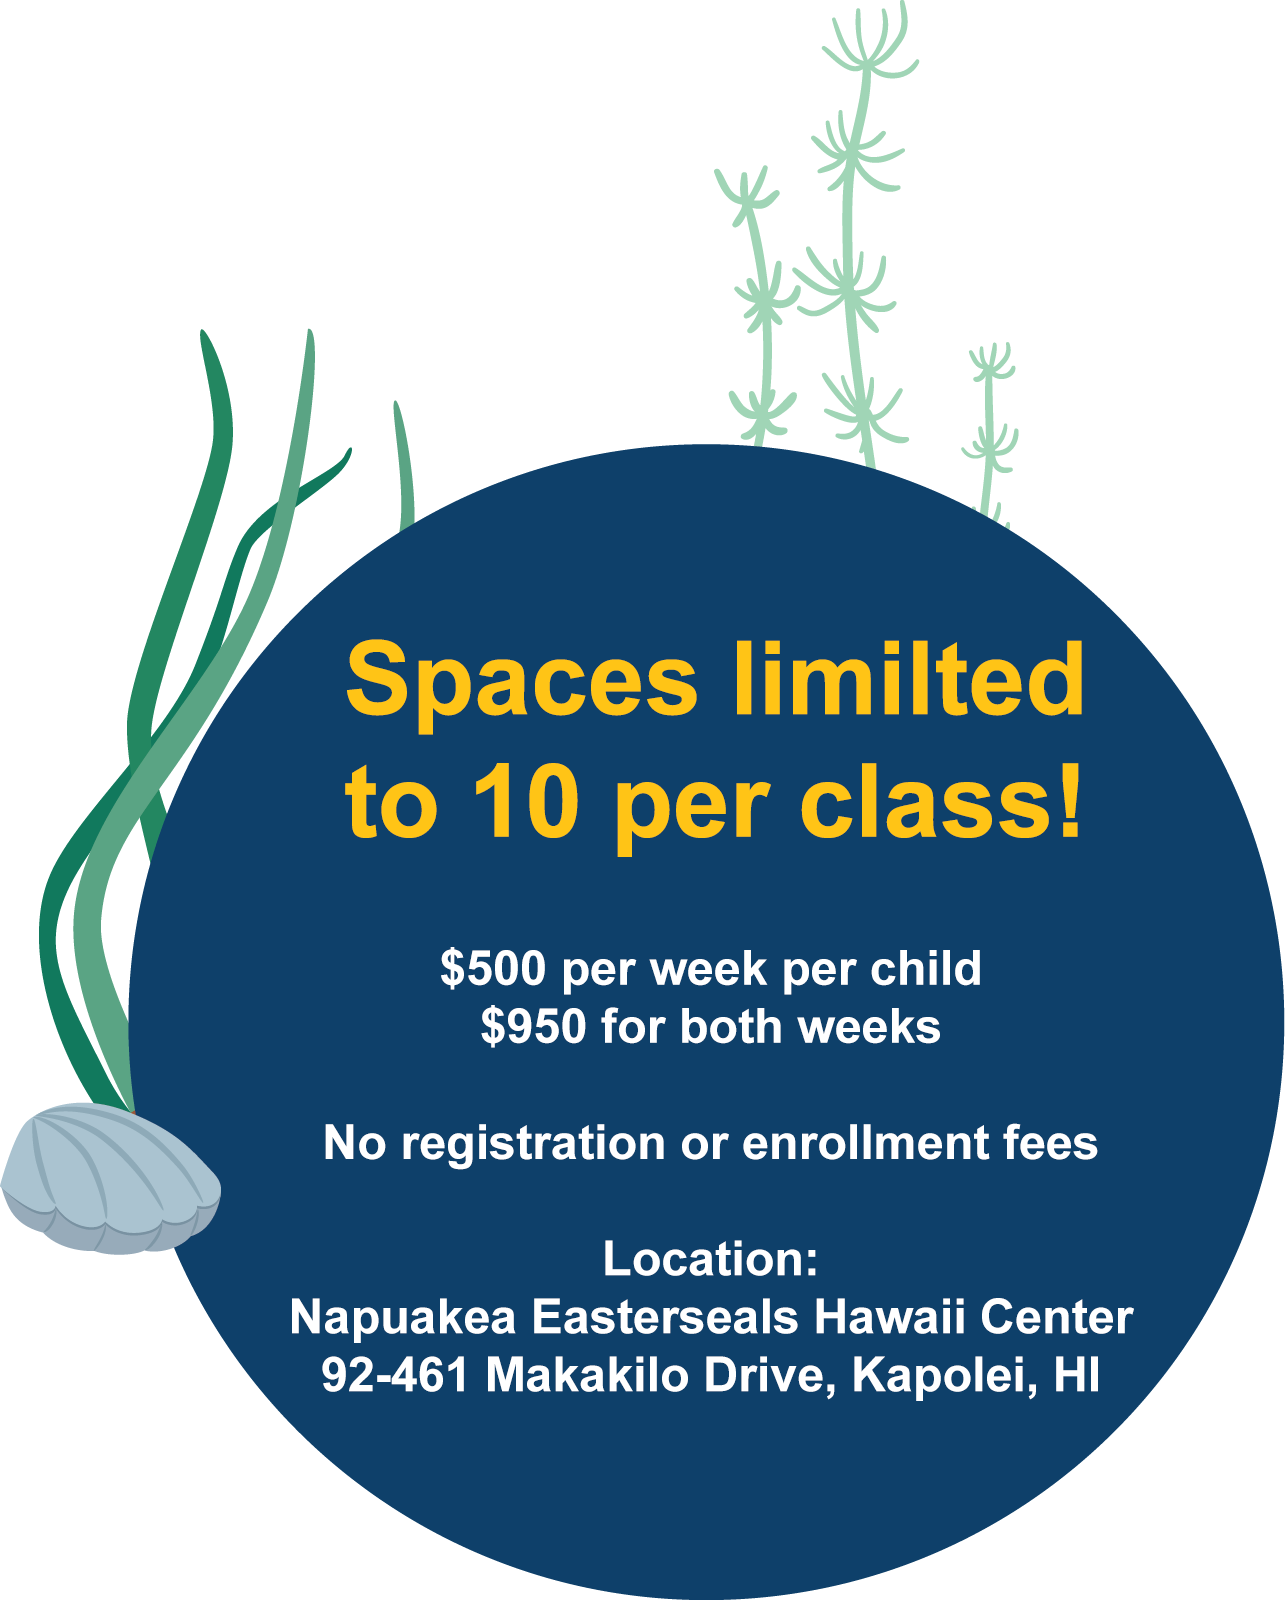 Spaces limited<br />
to 10 per class!<br />
$500 per week per child<br />
$950 for both weeks<br />
No registration or enrollment fees<br />
Location:<br />
Napuakea Easterseals Hawaii Center<br />
92-461 Makakilo Drive, Kapolei, HI